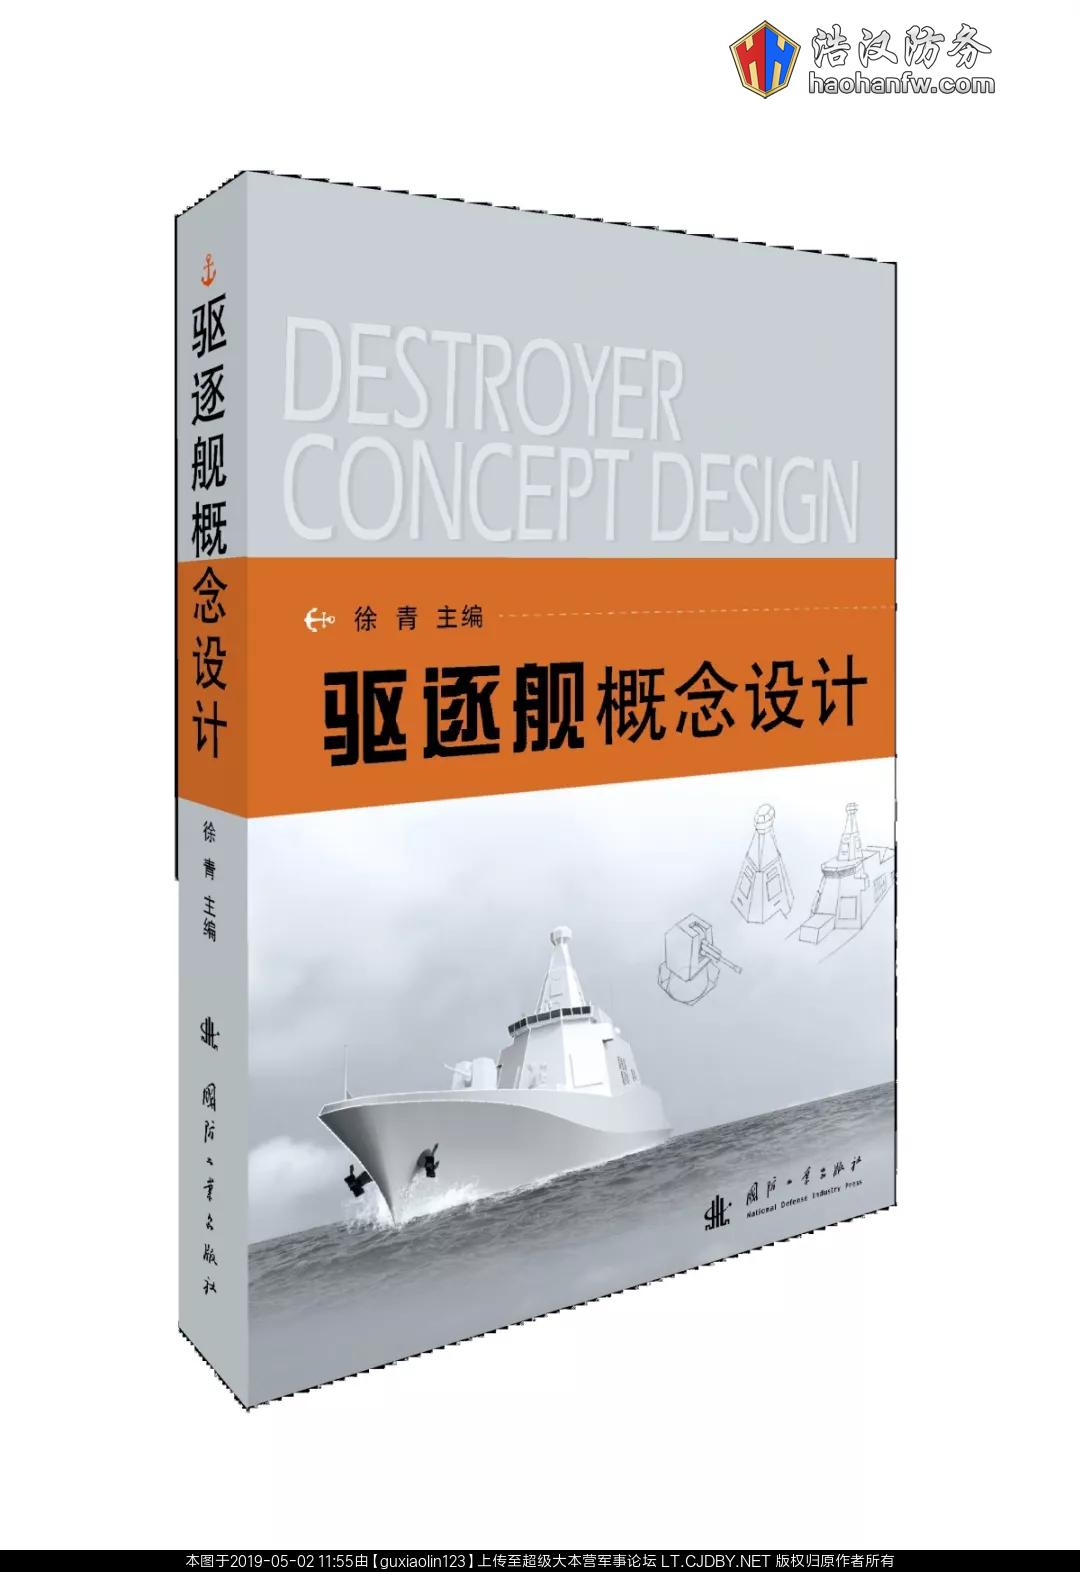 Type 055 DDG as the book cover.jpeg